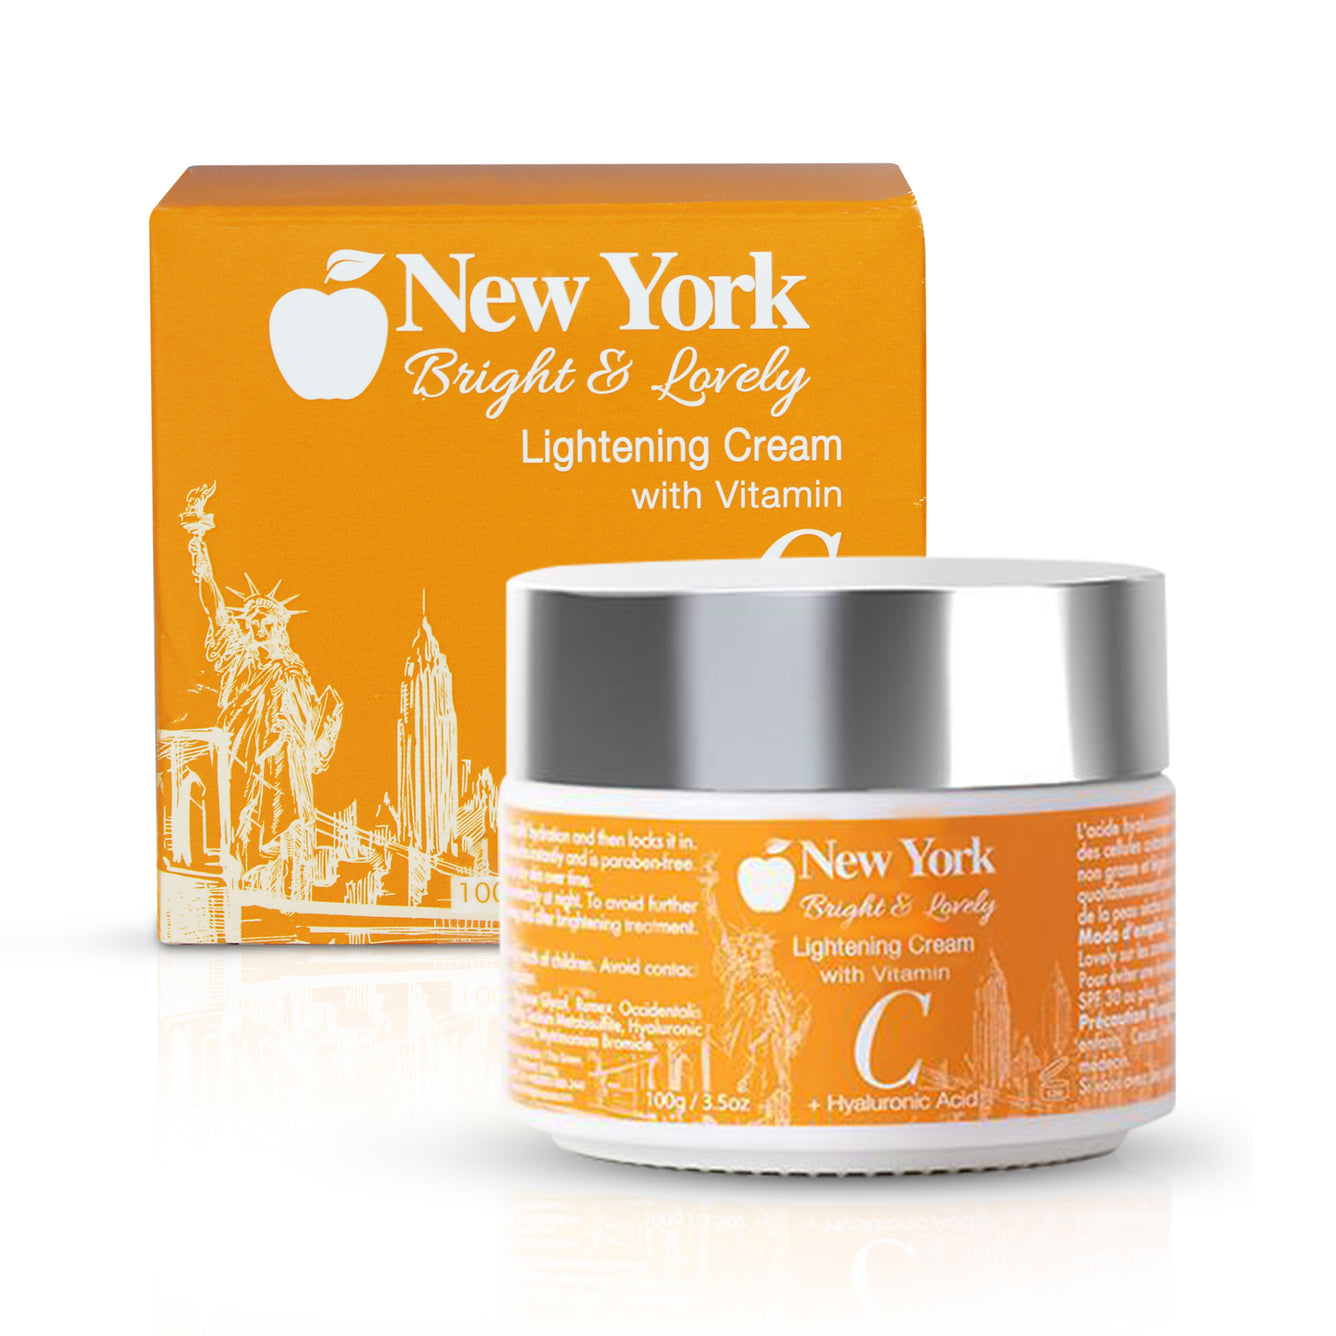 New York Bright & Lovely Lightening Cream with Vitamin C and Hyaluronic Acid - 100ml / 3.5 Oz Mitchell Brands - Mitchell Brands - Skin Lightening, Skin Brightening, Fade Dark Spots, Shea Butter, Hair Growth Products